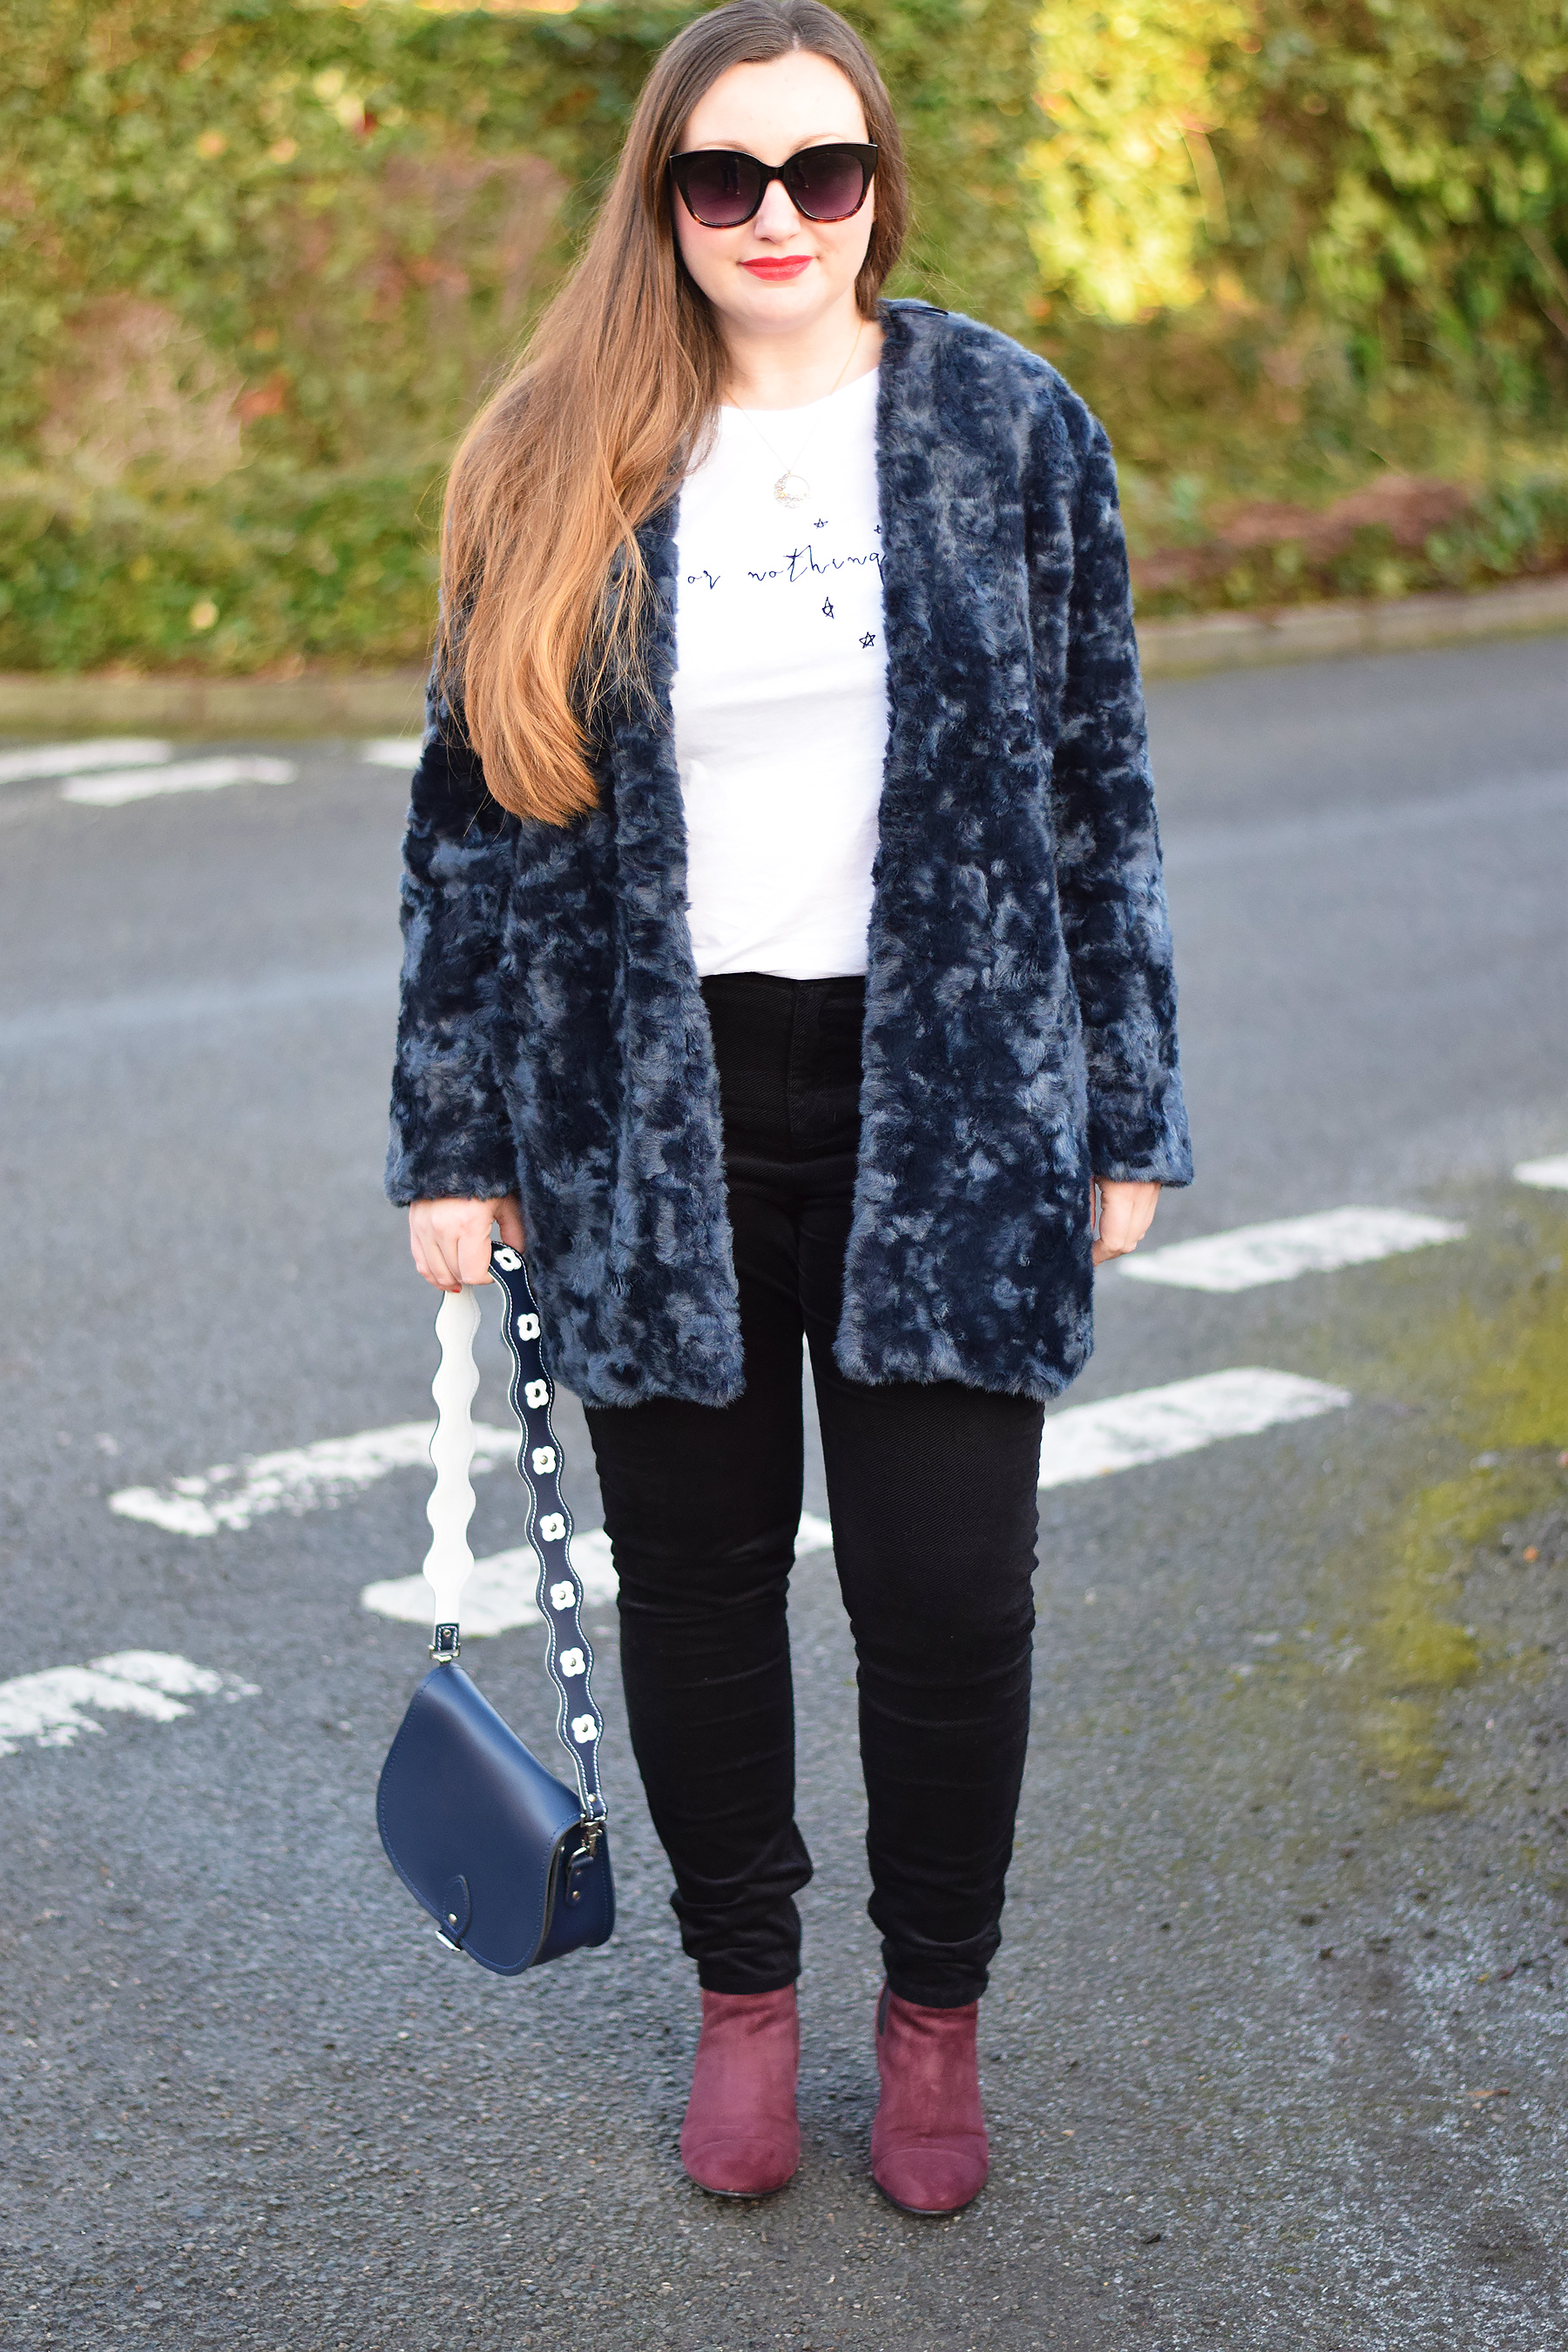 navy and black outfit with different textures